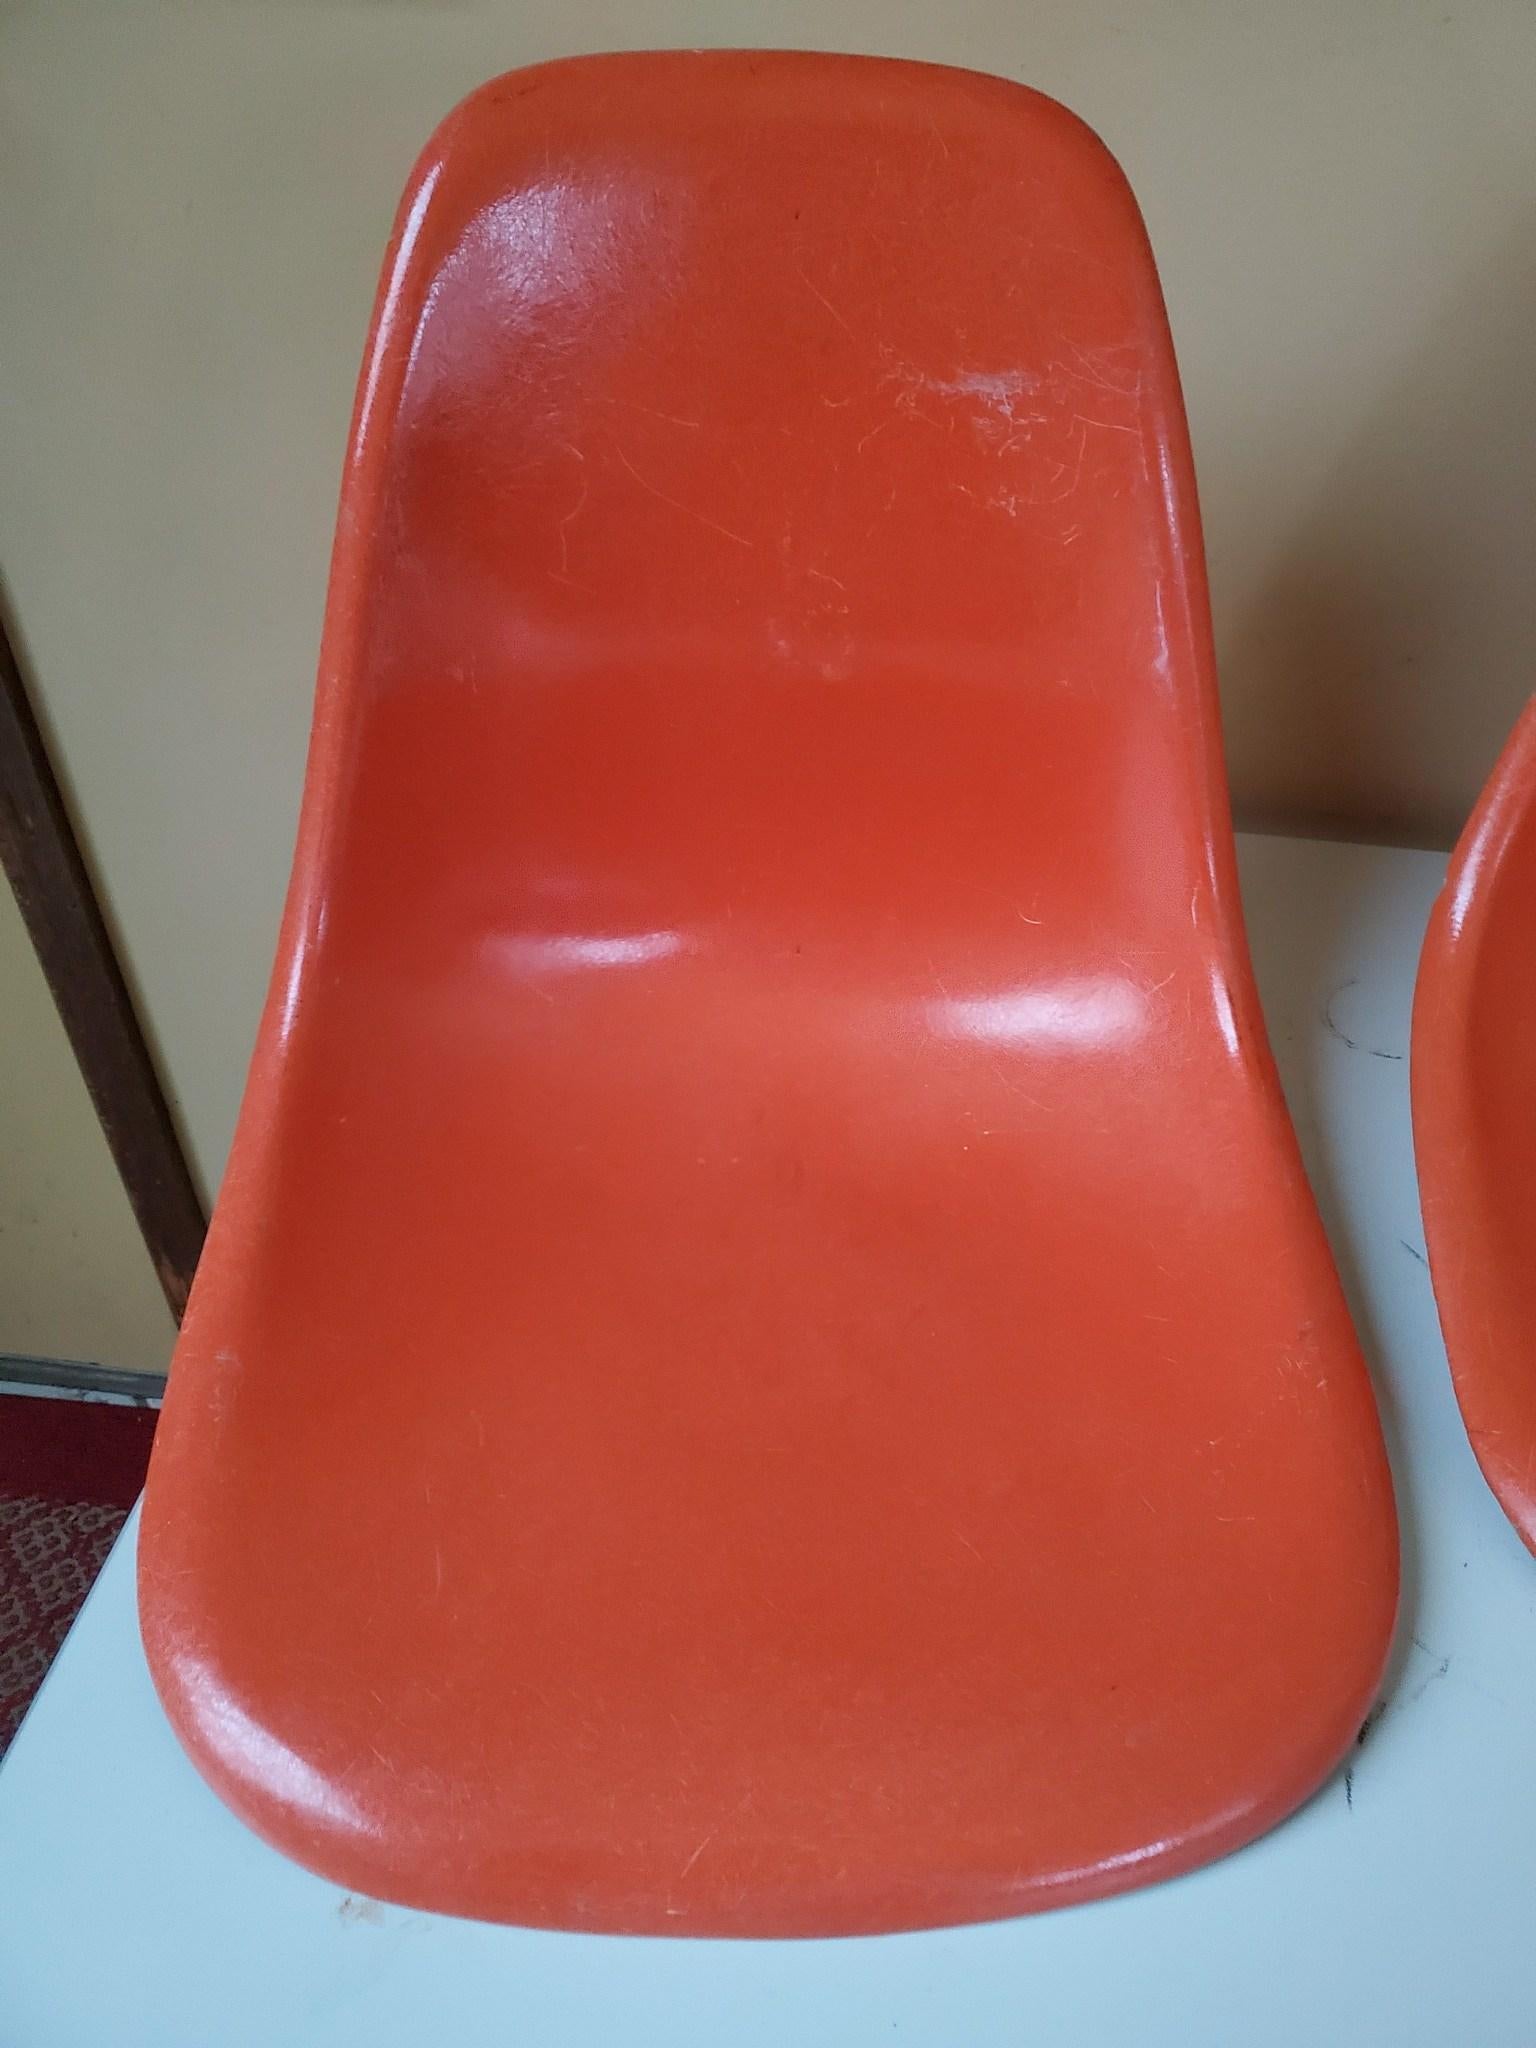 Four Herman Miller Eames dining chairs in red orange. New walnut dowel bases. Shells and bases ship in two boxes. Assembly takes 4-6 mins with a single screwdriver.
  